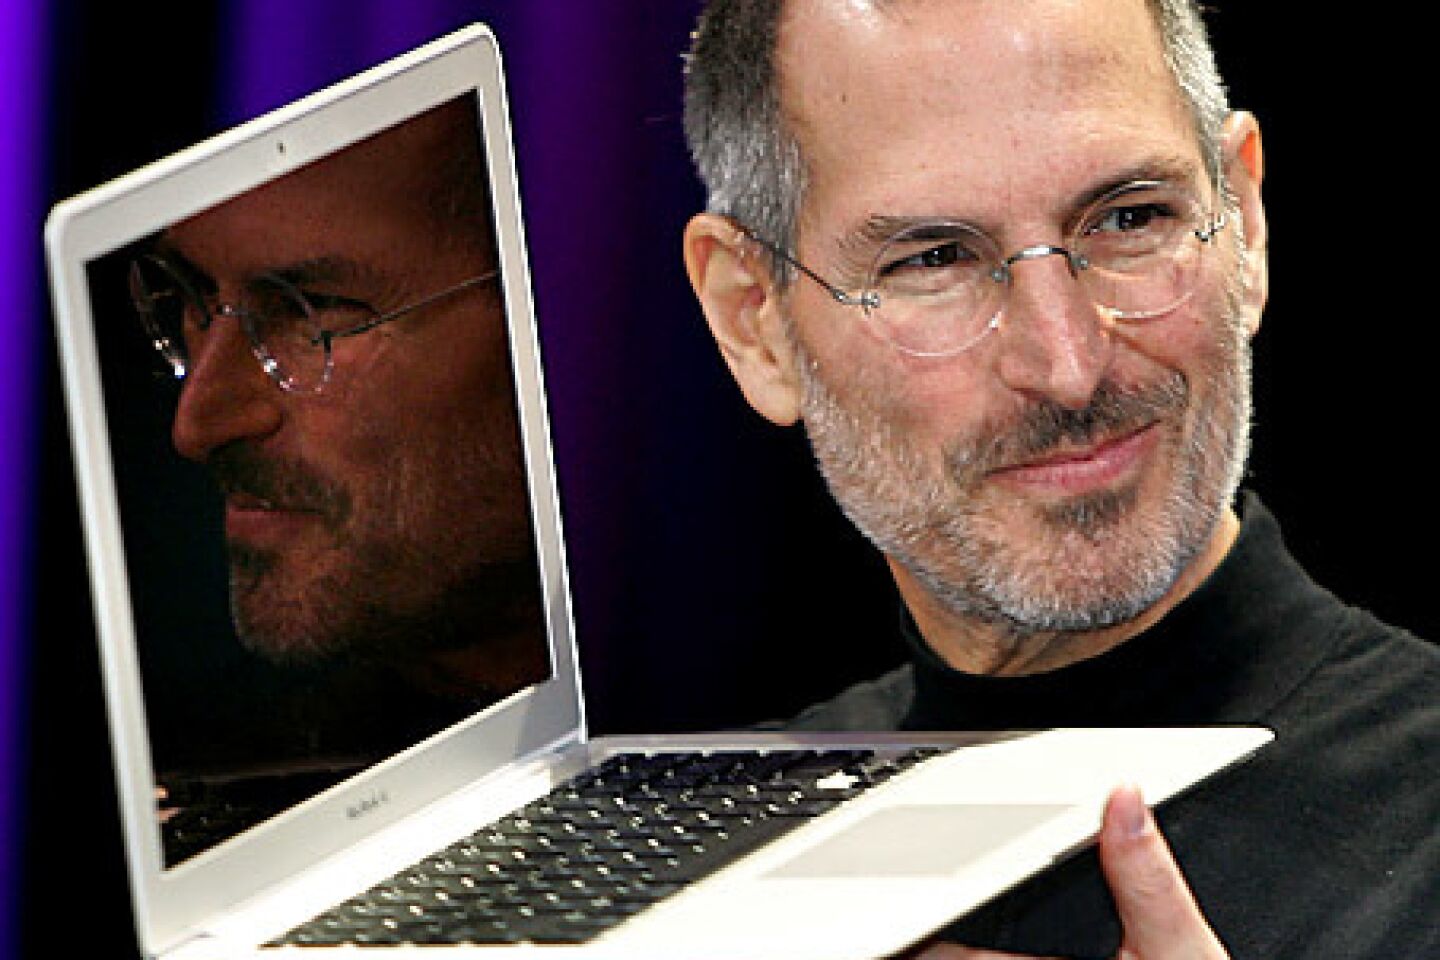 Jobs shows off the new Macbook Air, a small, light laptop, during his keynote speech at the 2008 MacWorld conference in San Francisco. Almost exactly one year later, Jobs announced that he would take a medical leave of absence from Apple through June, saying his health issues were "more complex than I originally thought."